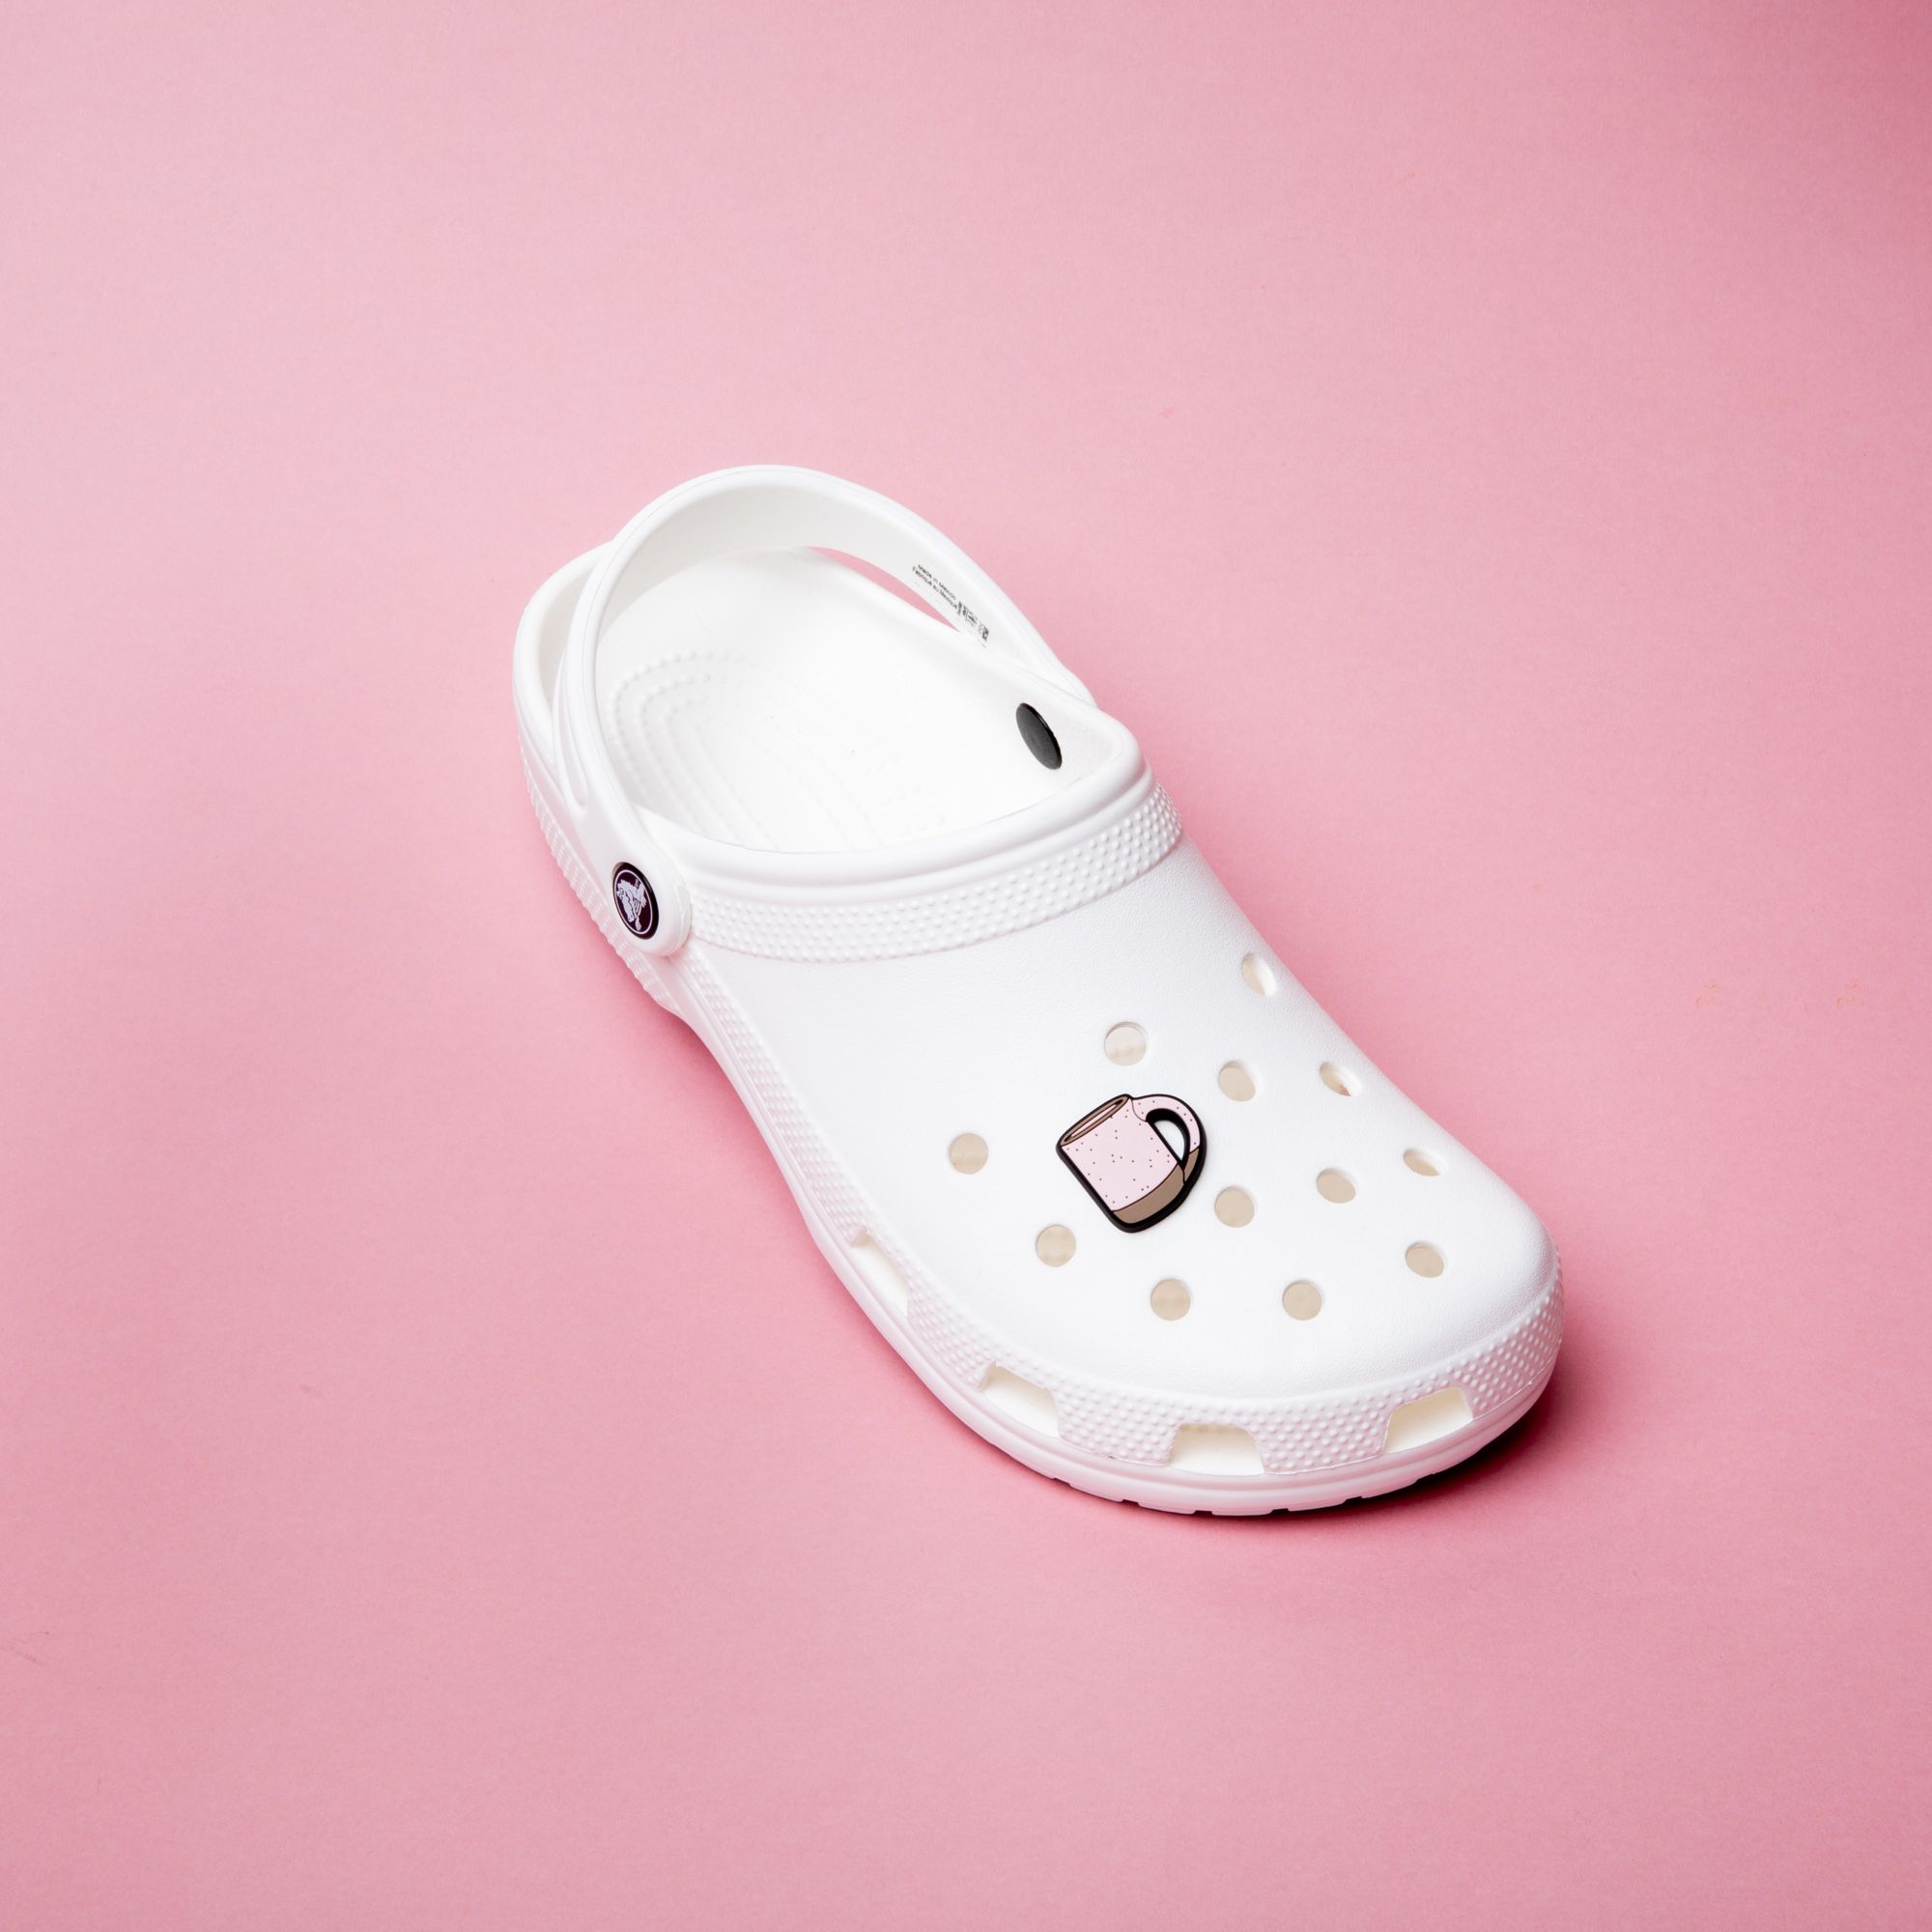 A white plastic clog made by the brand Crocs with a soft light pink charm on the top that looks like an East Fork mug